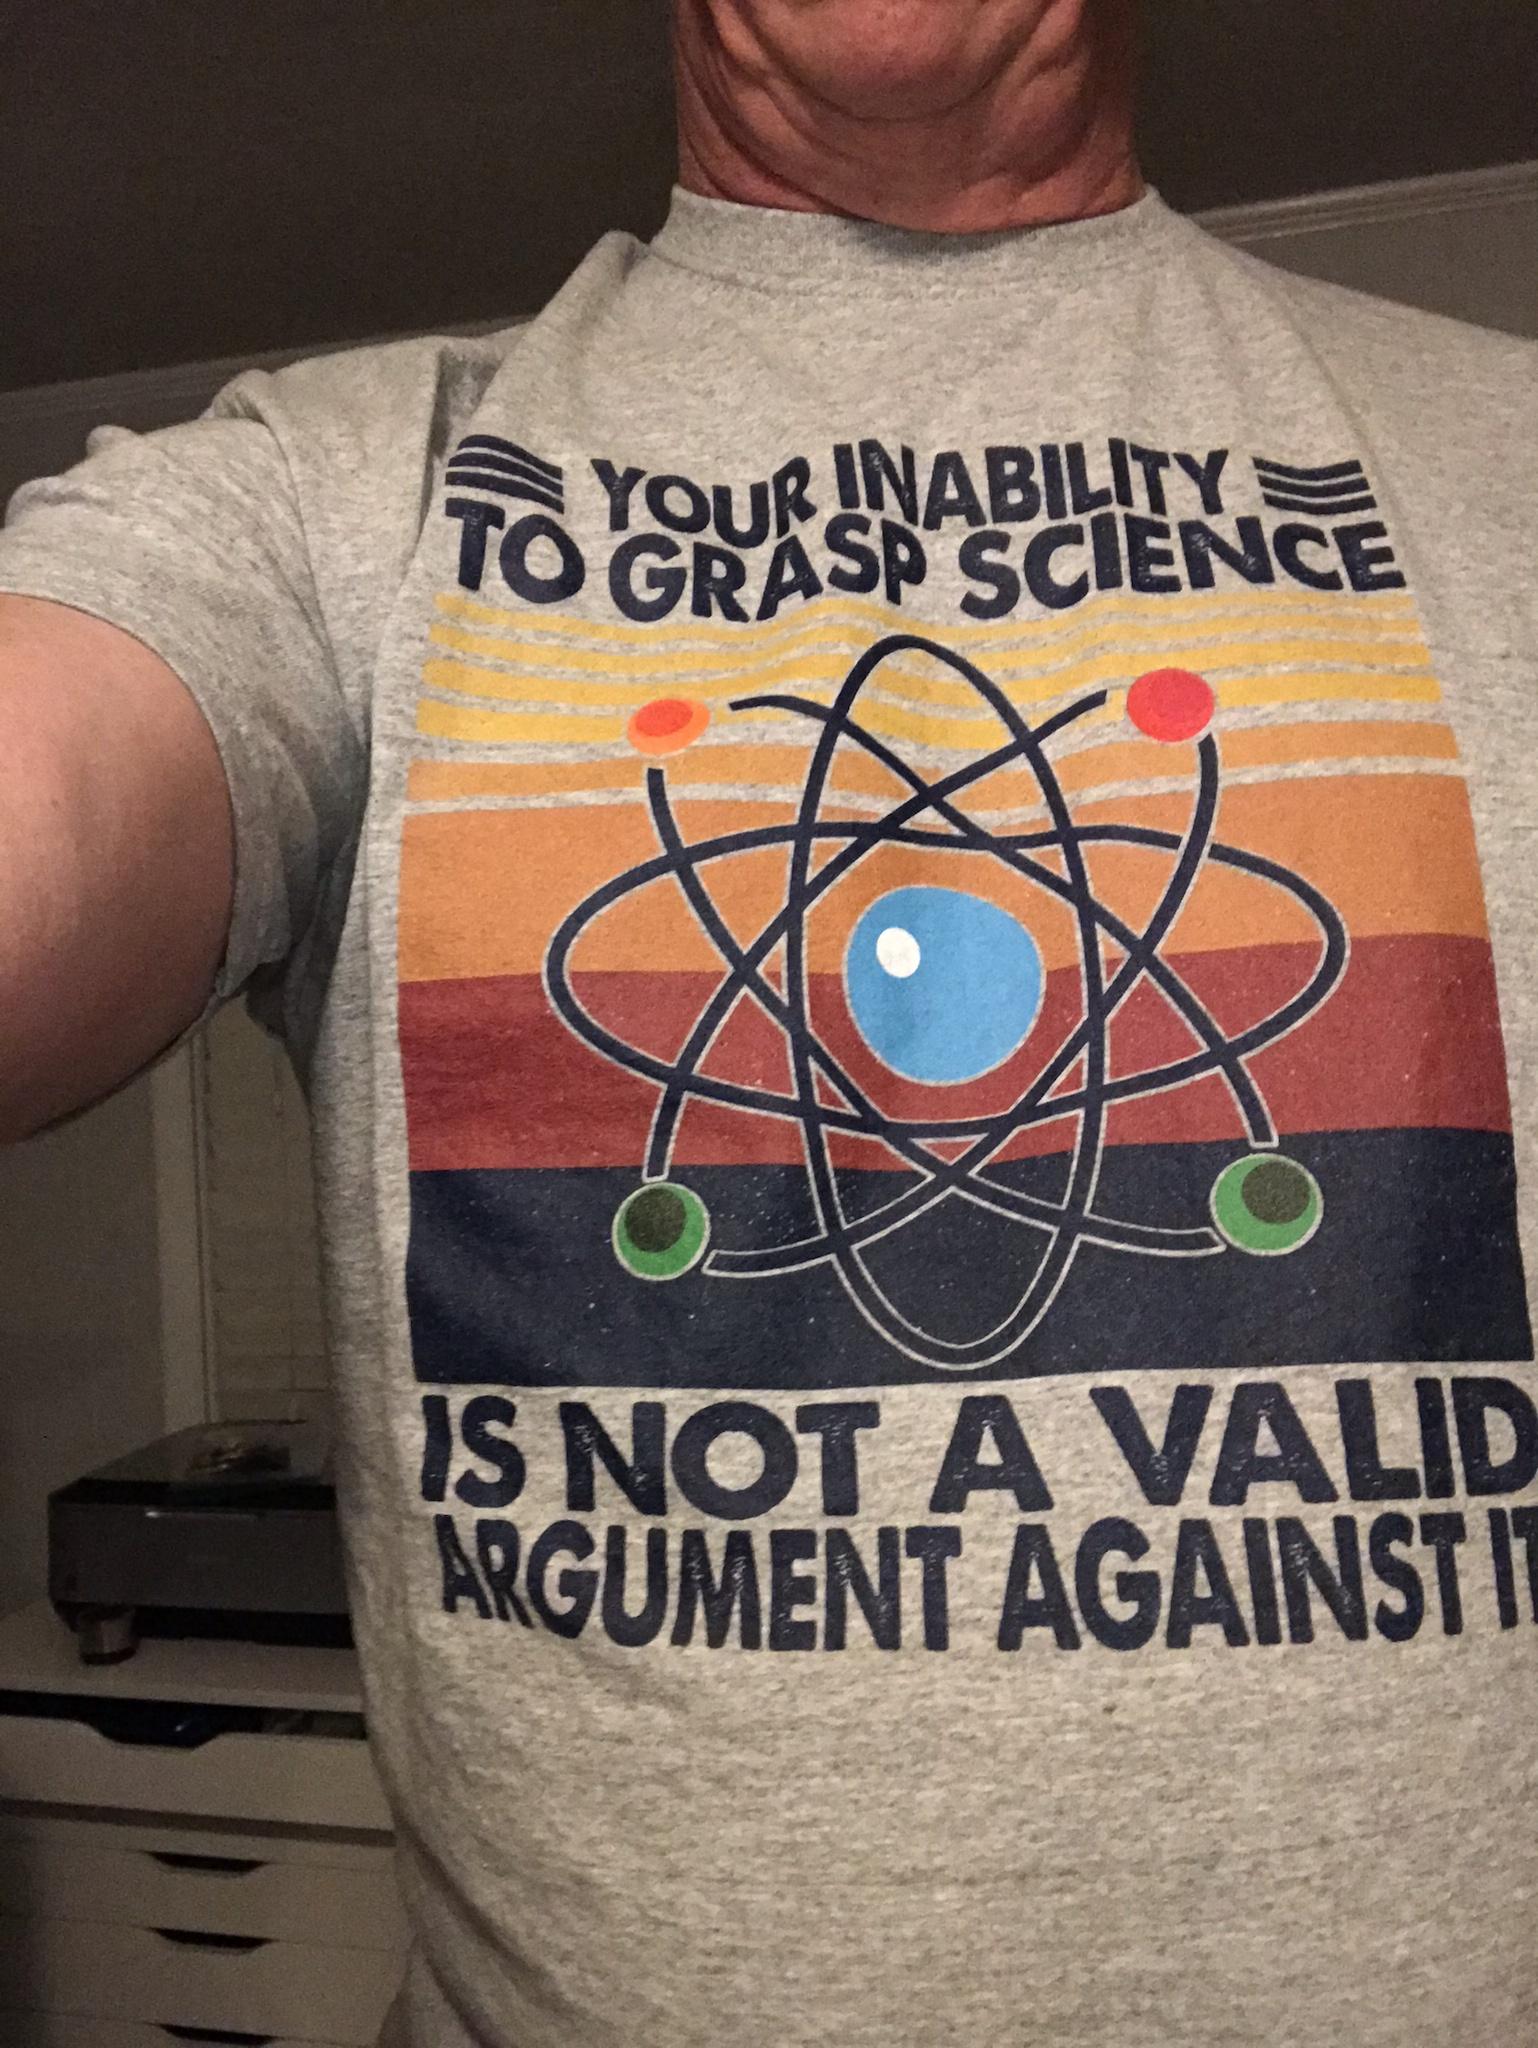 t shirt - To Grasp Science Your Inability Is Not A Valid Argument Against T